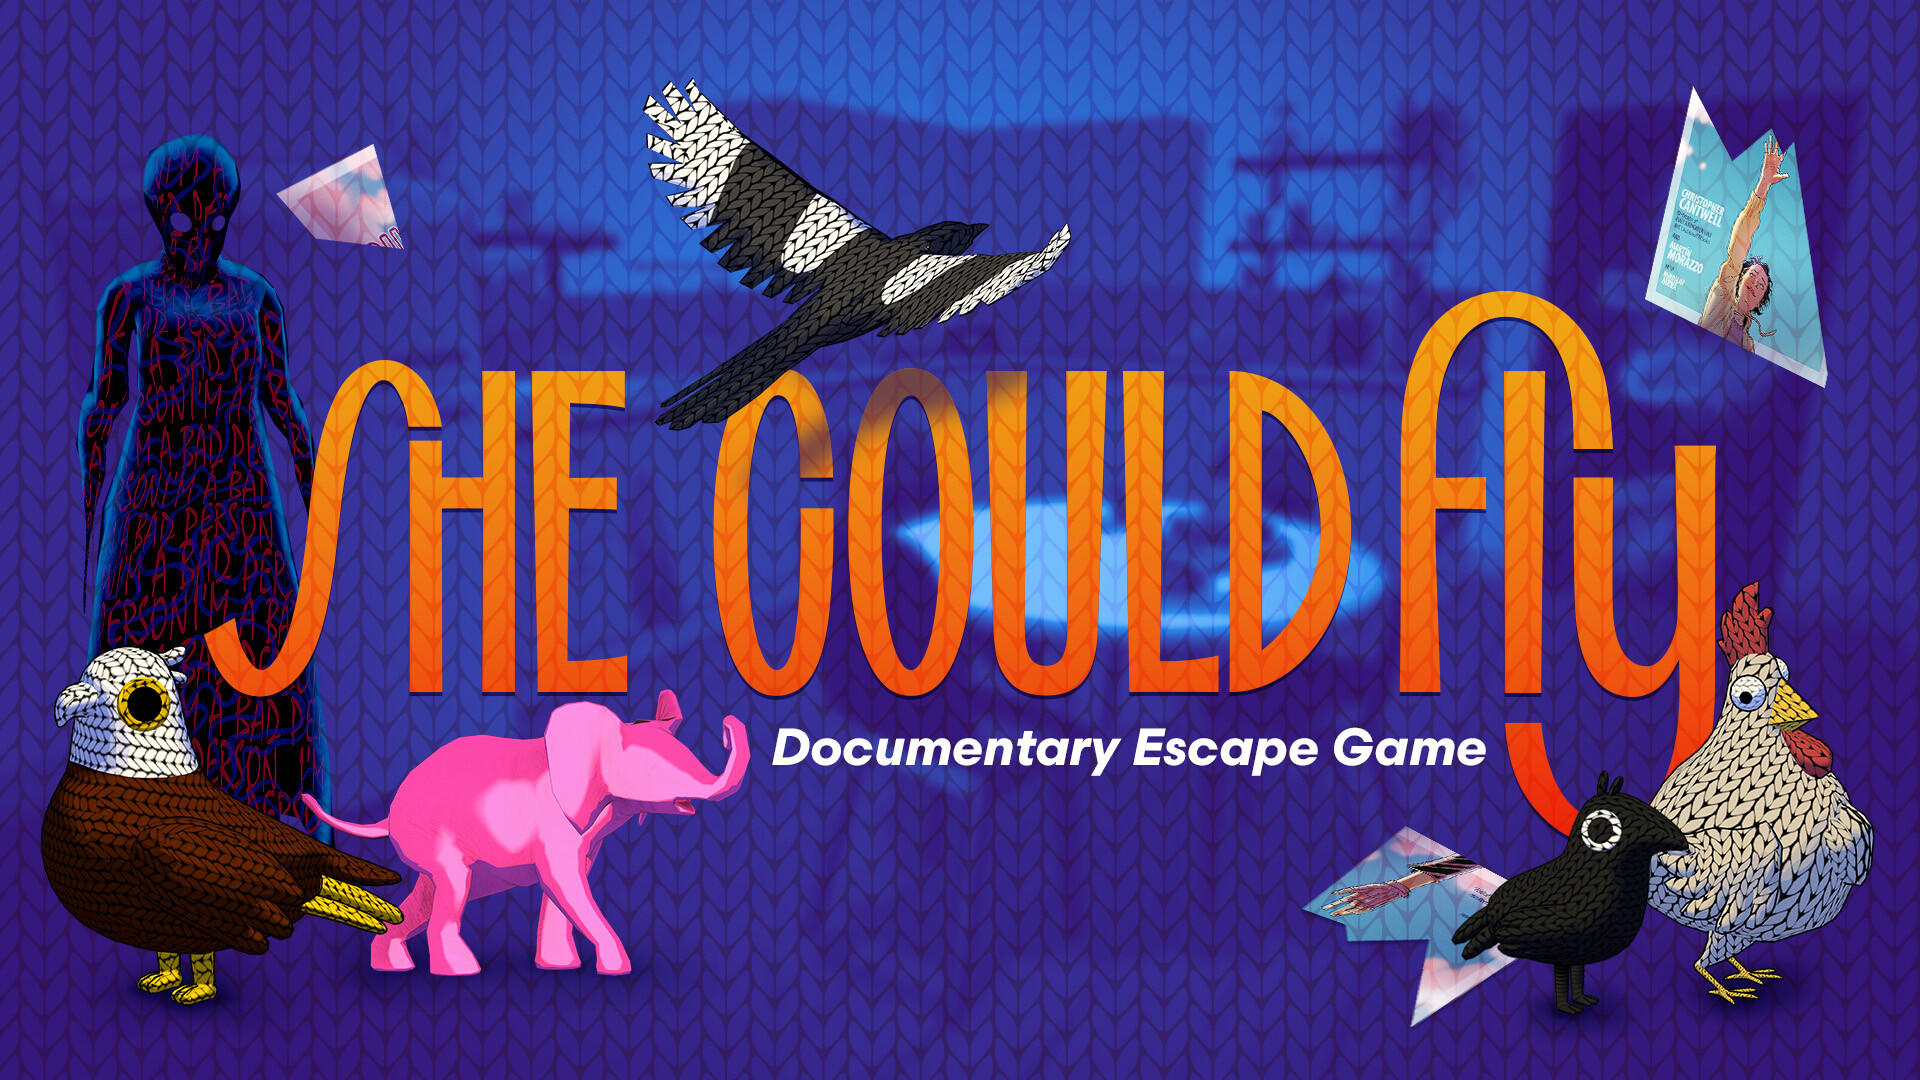 She Could Fly: Documentary Escape Gameのキャプチャ